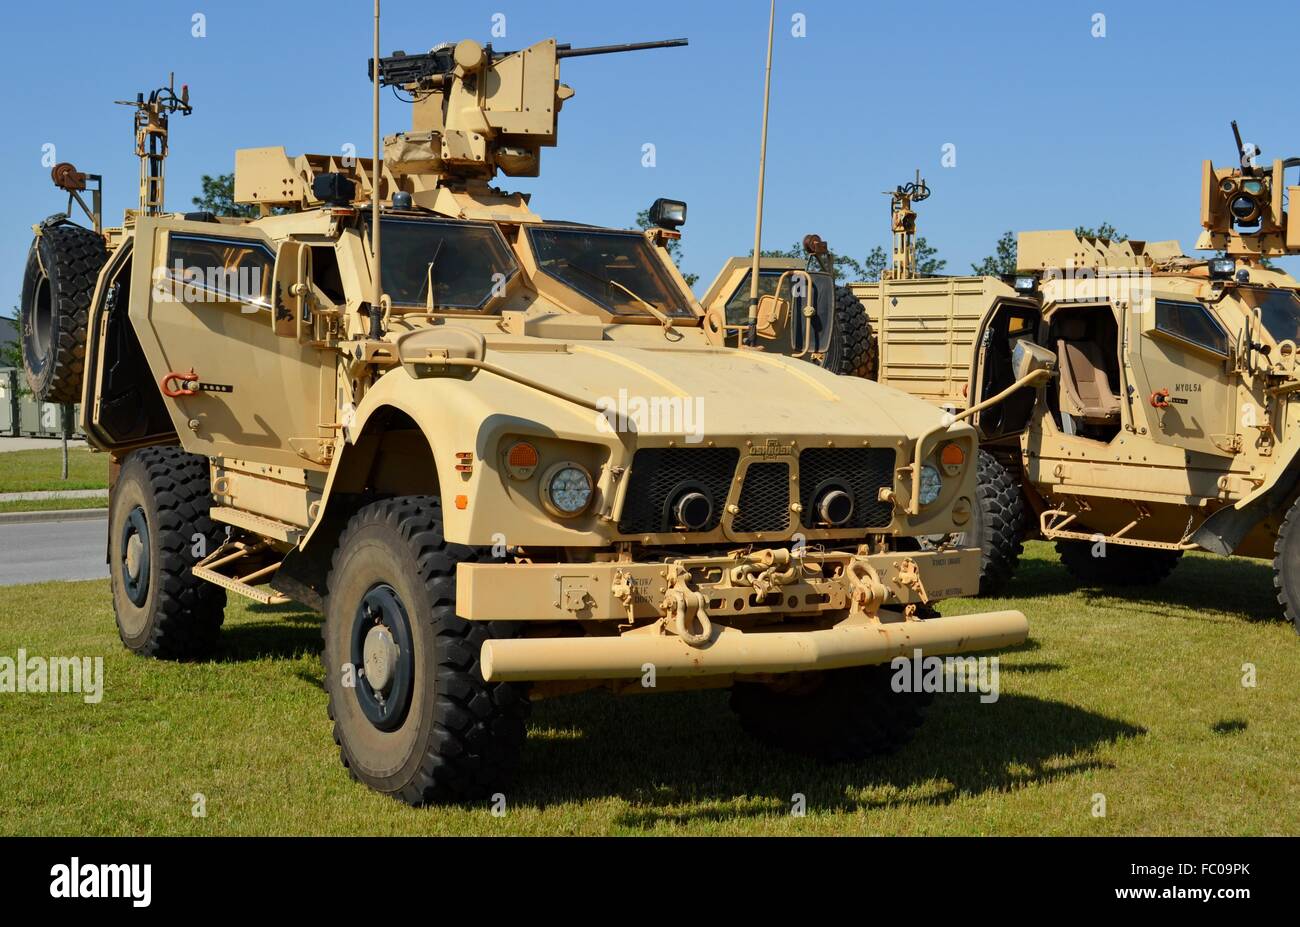 The Oshkosh Mine-Resistant Ambush Protected (MRAP) truck is used by the U.S. military for troop transportation. Stock Photo